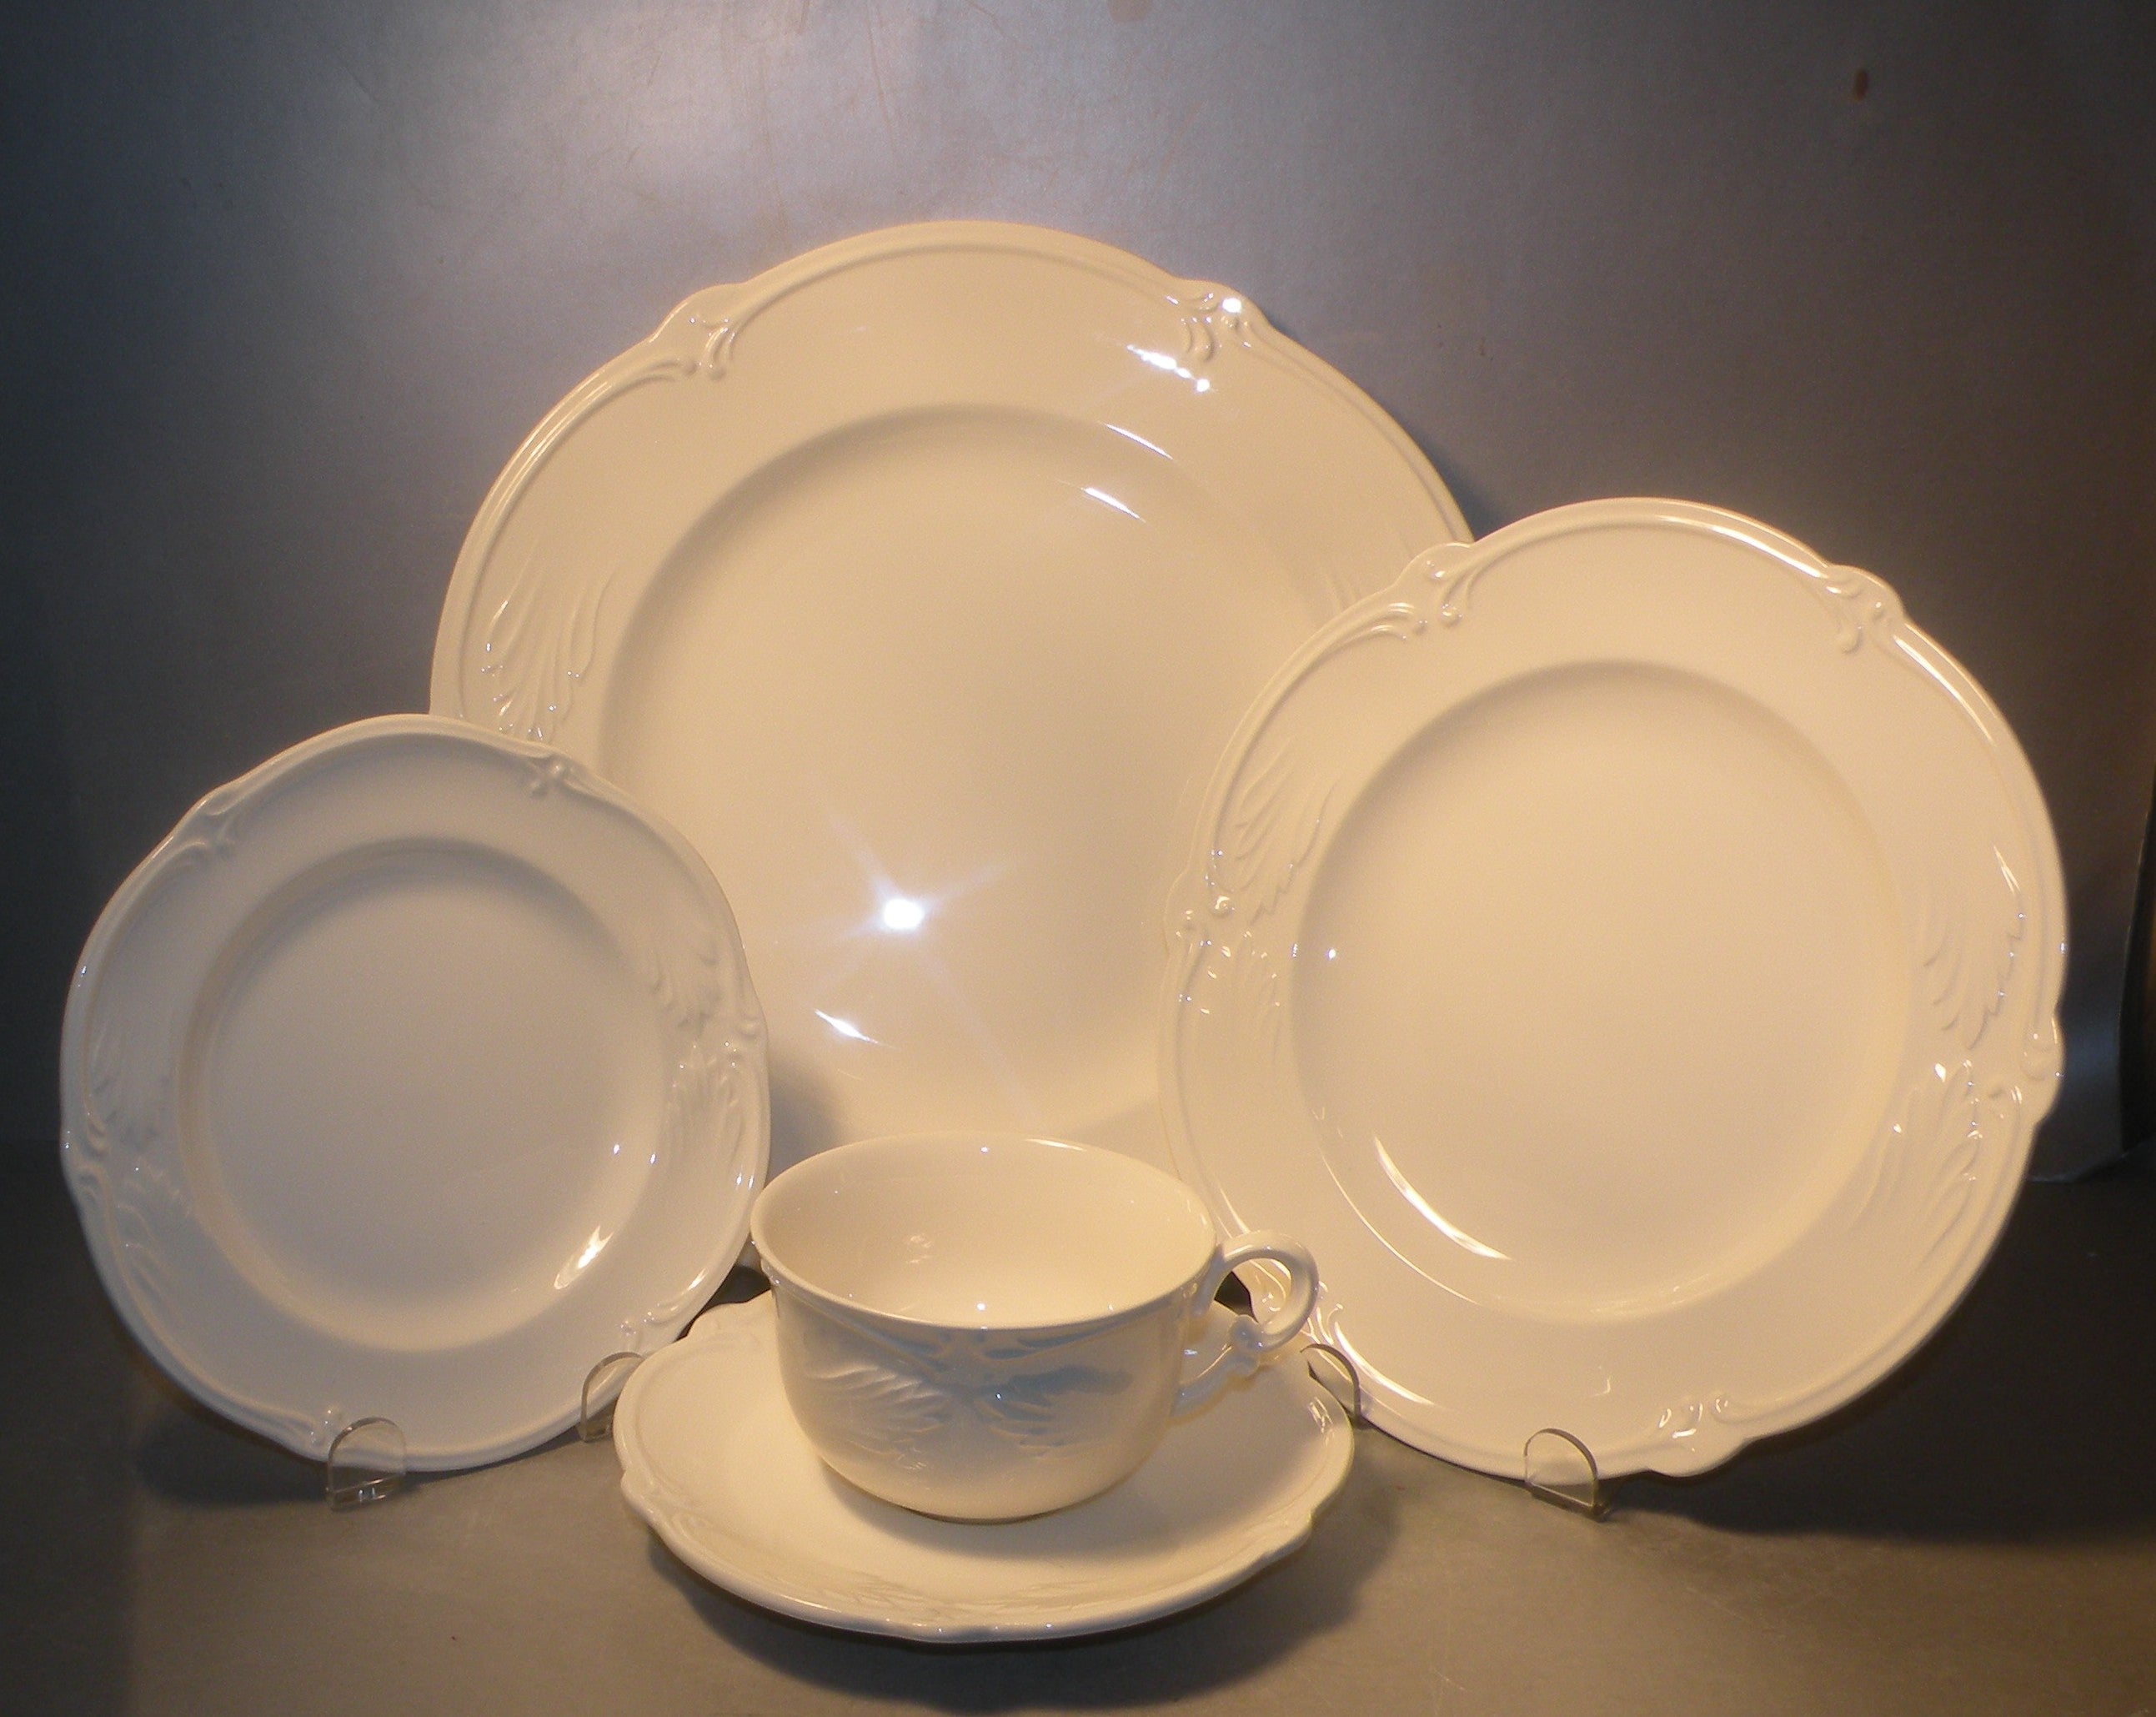 5 Pc. Place setting, Rocaille White